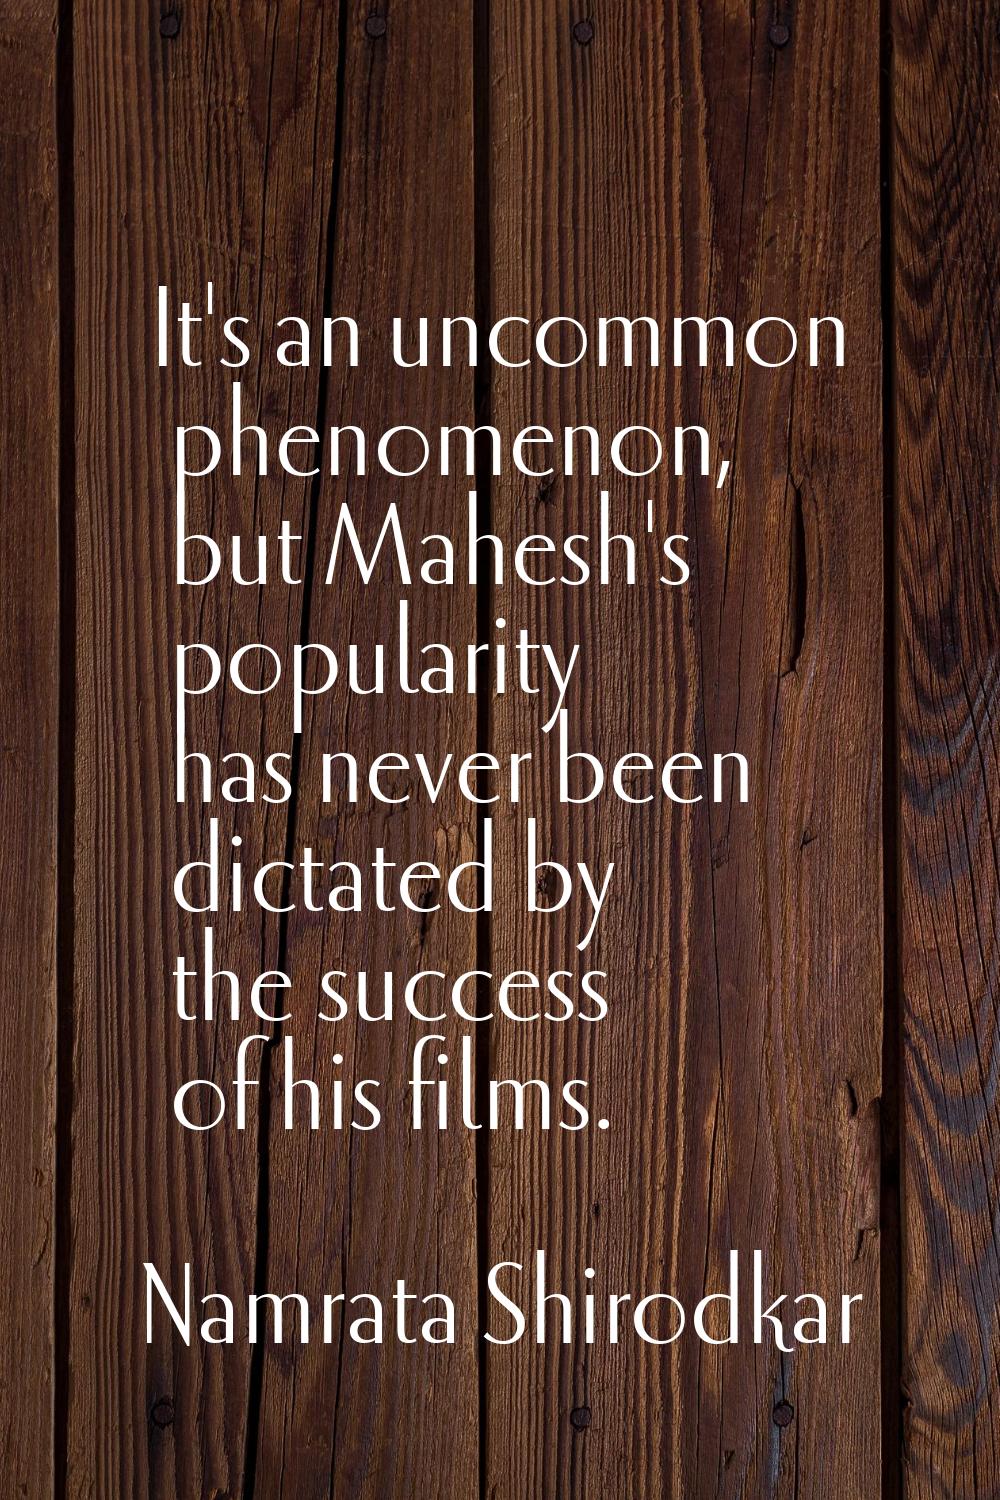 It's an uncommon phenomenon, but Mahesh's popularity has never been dictated by the success of his 